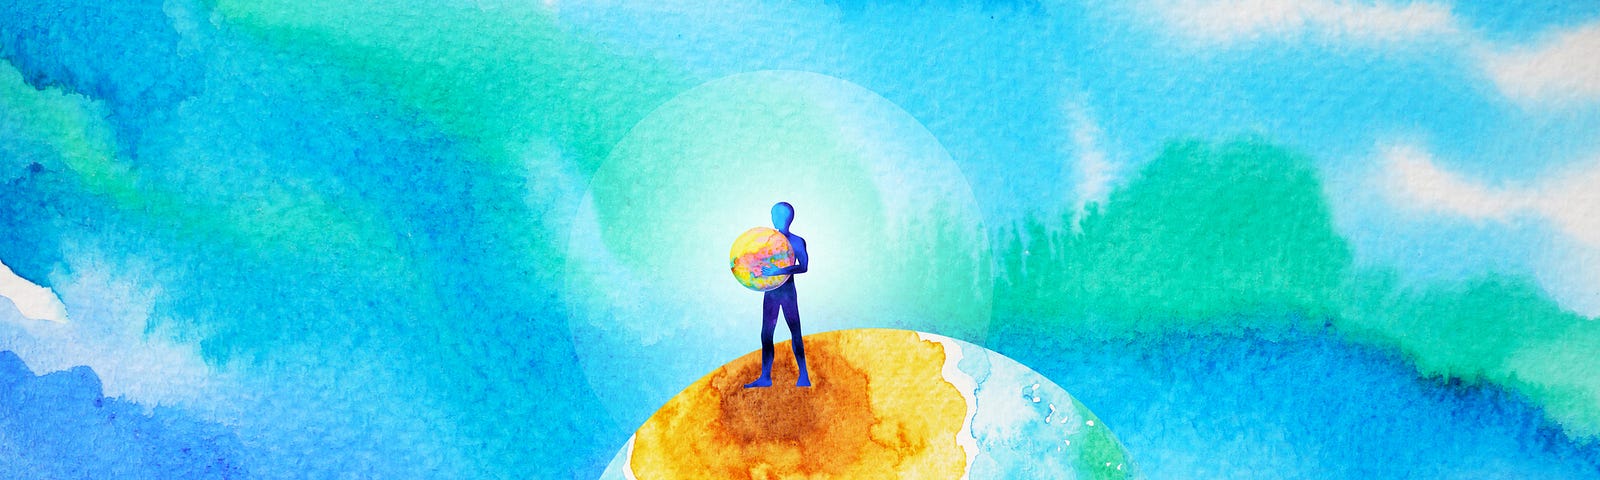 Watercolor illustration of a person standing on a colorful globe holding a globe.